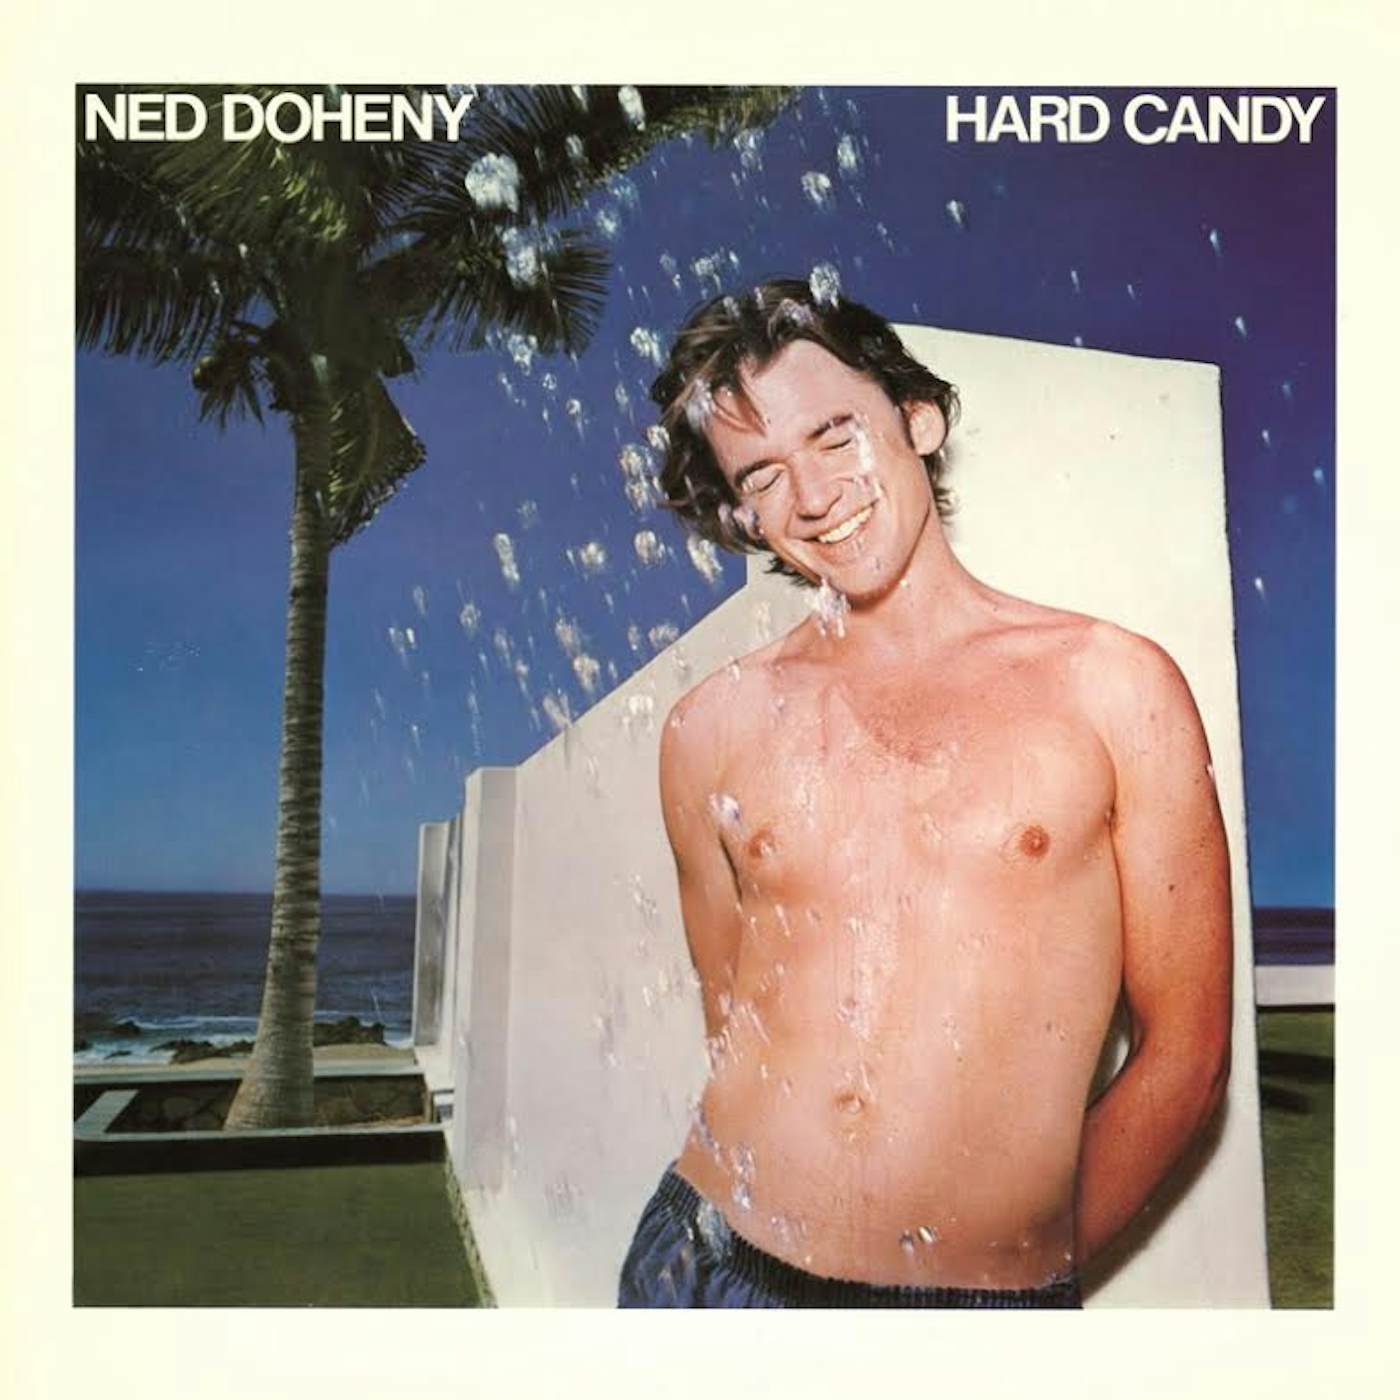 Ned Doheny HARD CANDY Vinyl Record - Limited Edition, 180 Gram Pressing